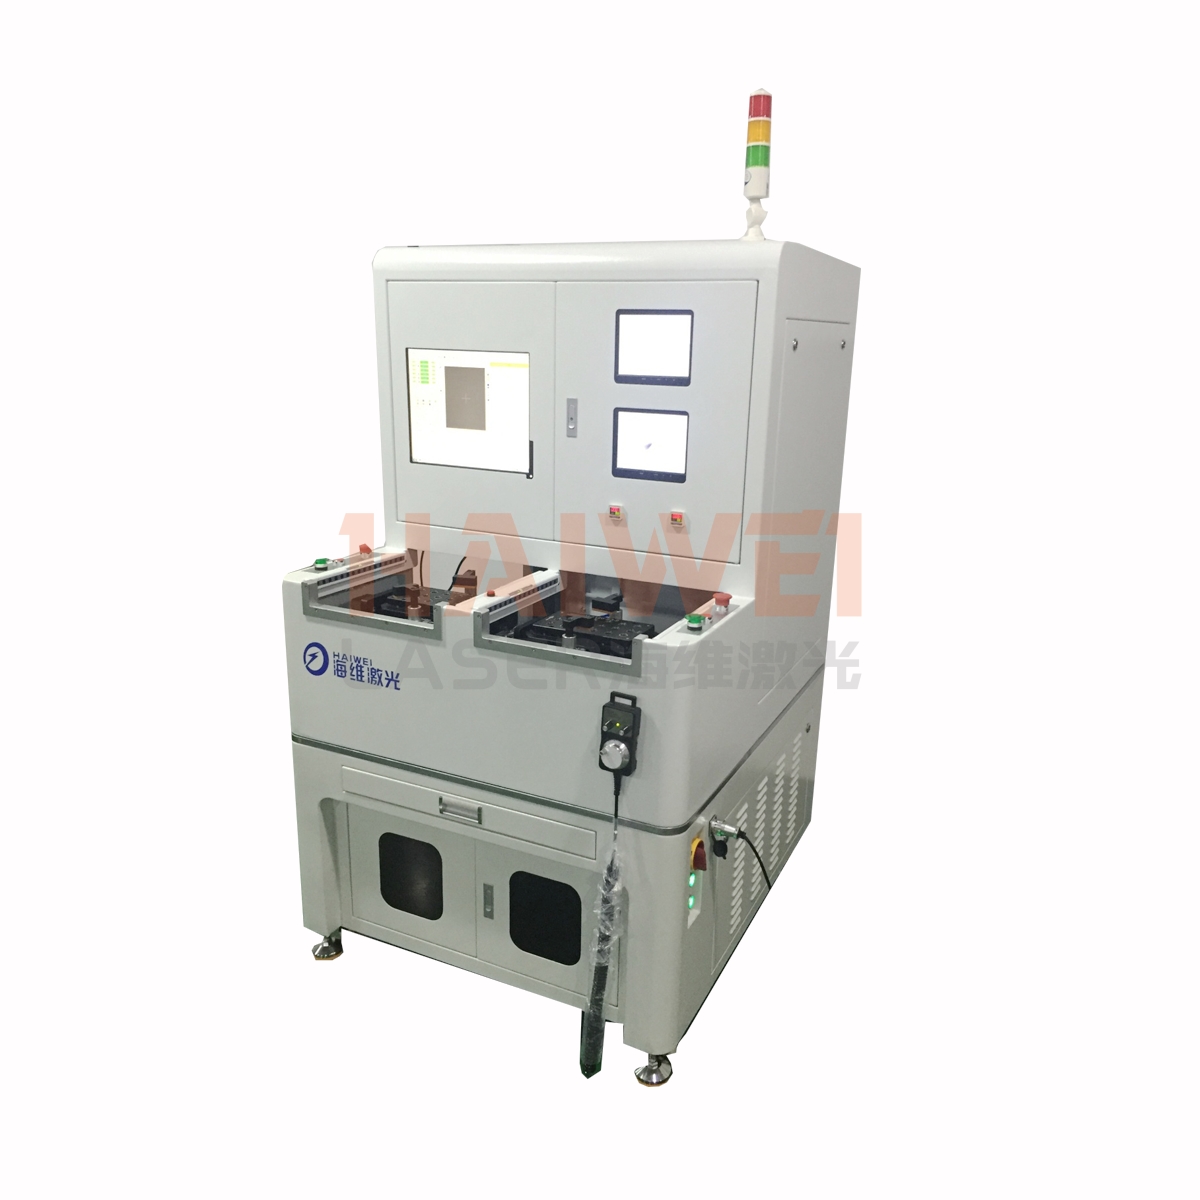 Automated customized laser welding system